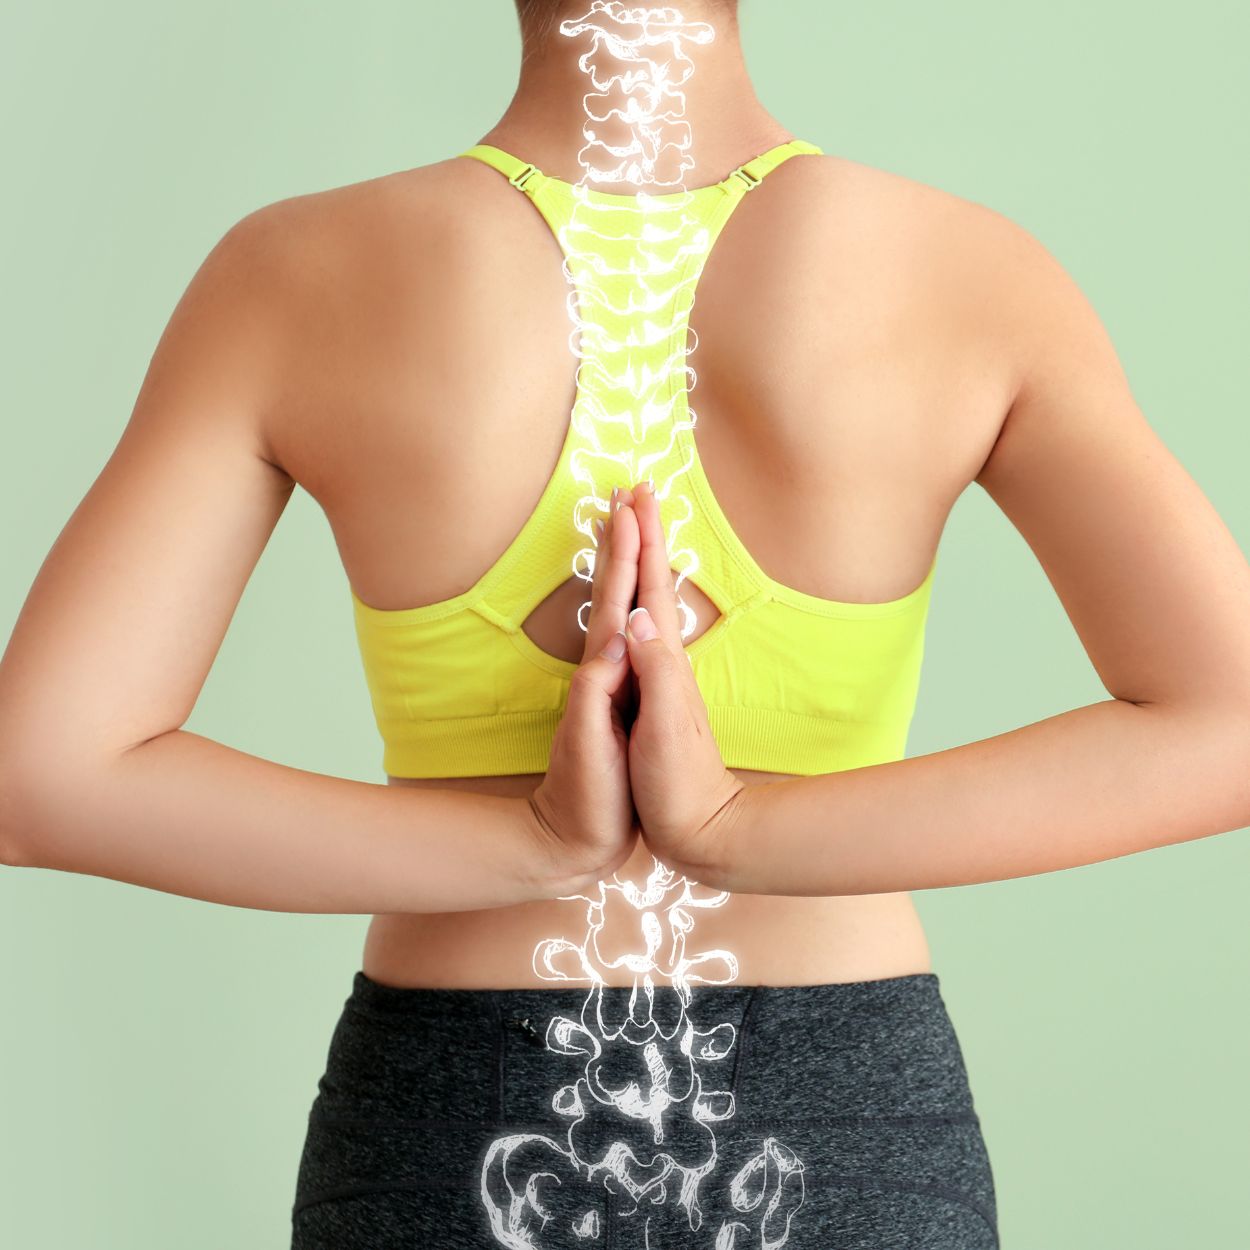 Spinal integrity in yoga